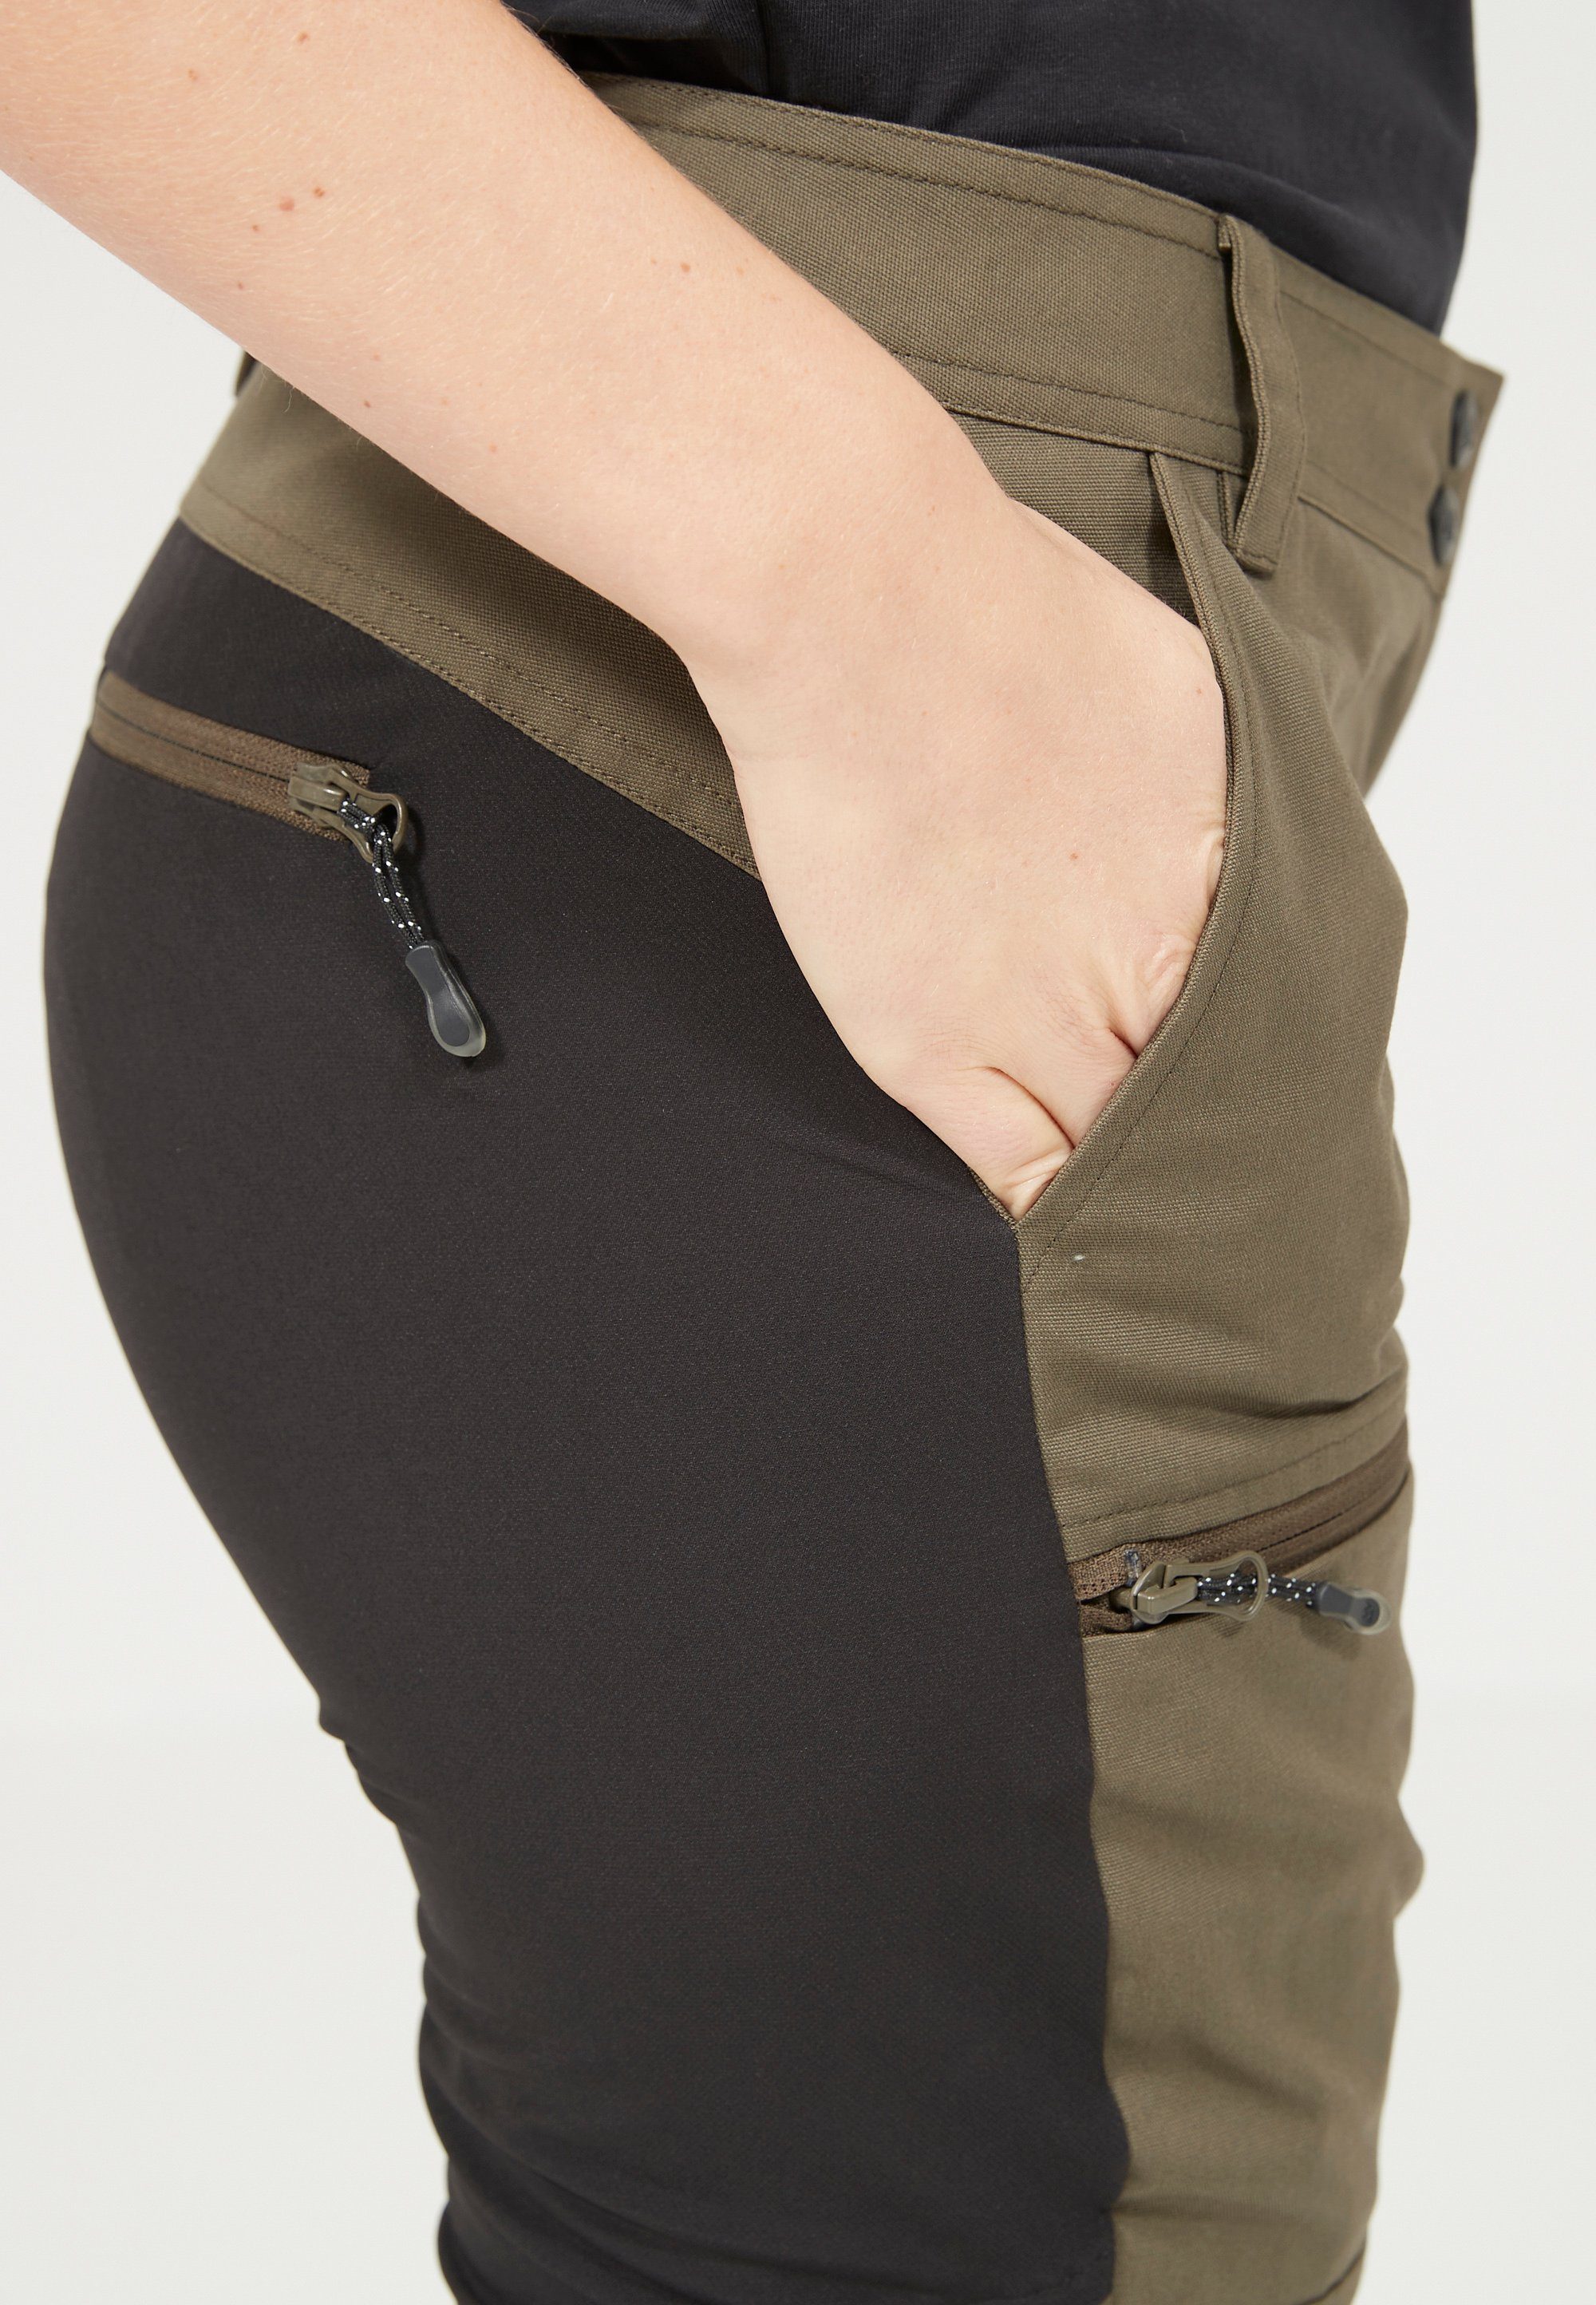 W Kniepatches ACTIV PANTS Cargohose mit funktionalen BLEE WHISTLER